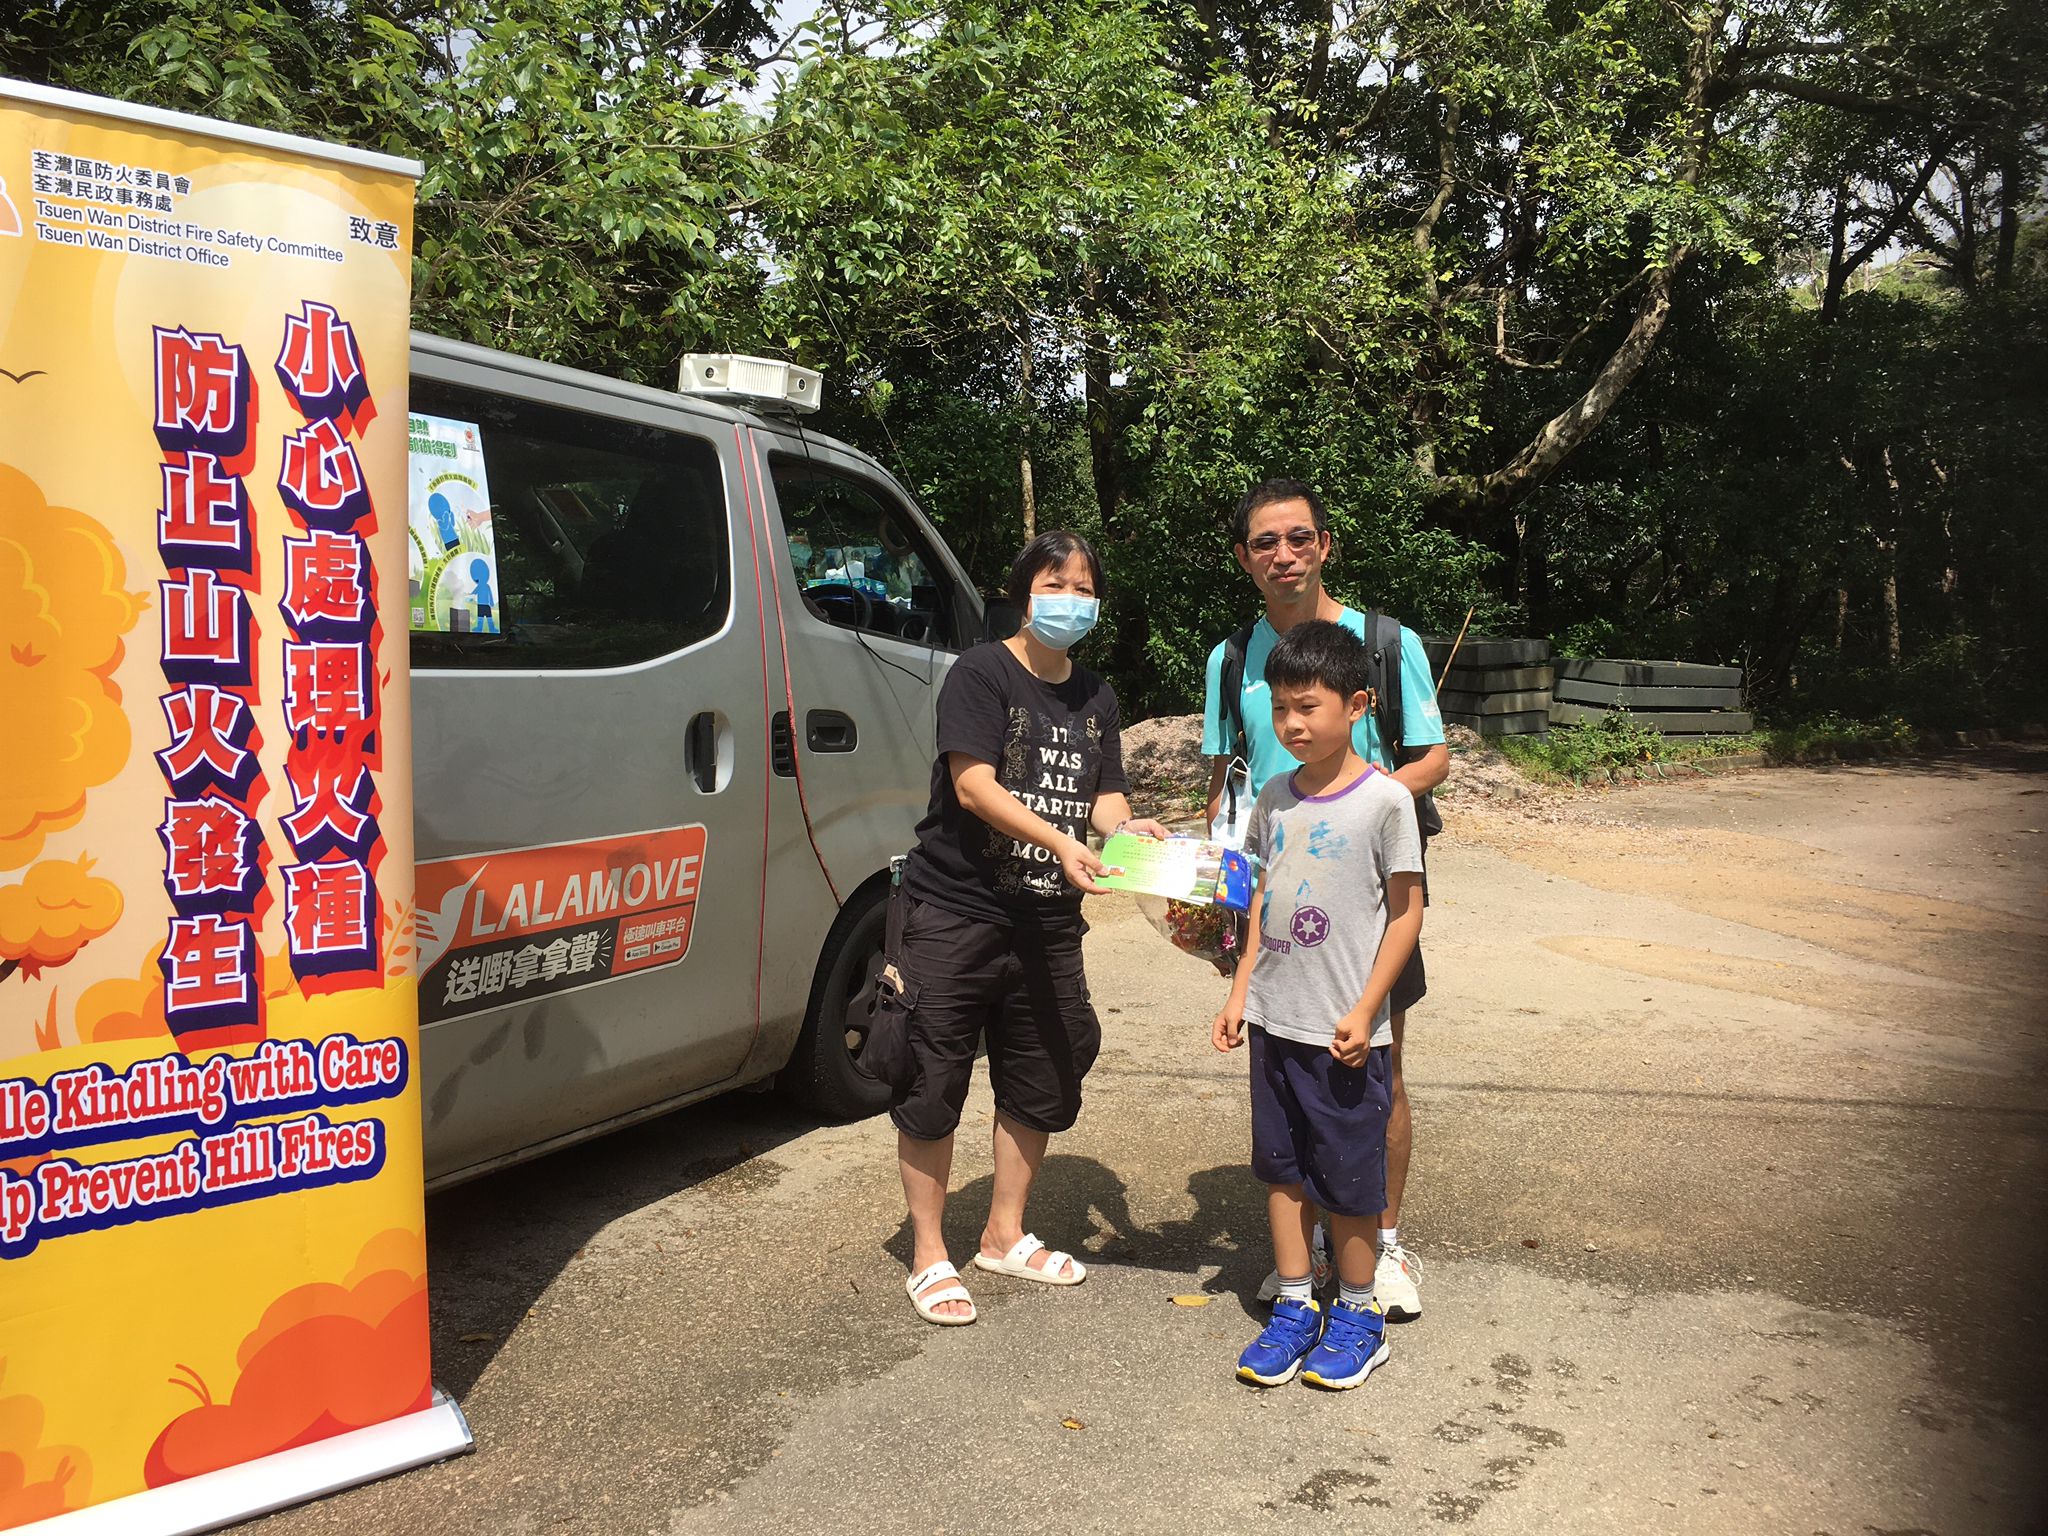 Publicity for Hill Fire Prevention during Chung Yeung Festival